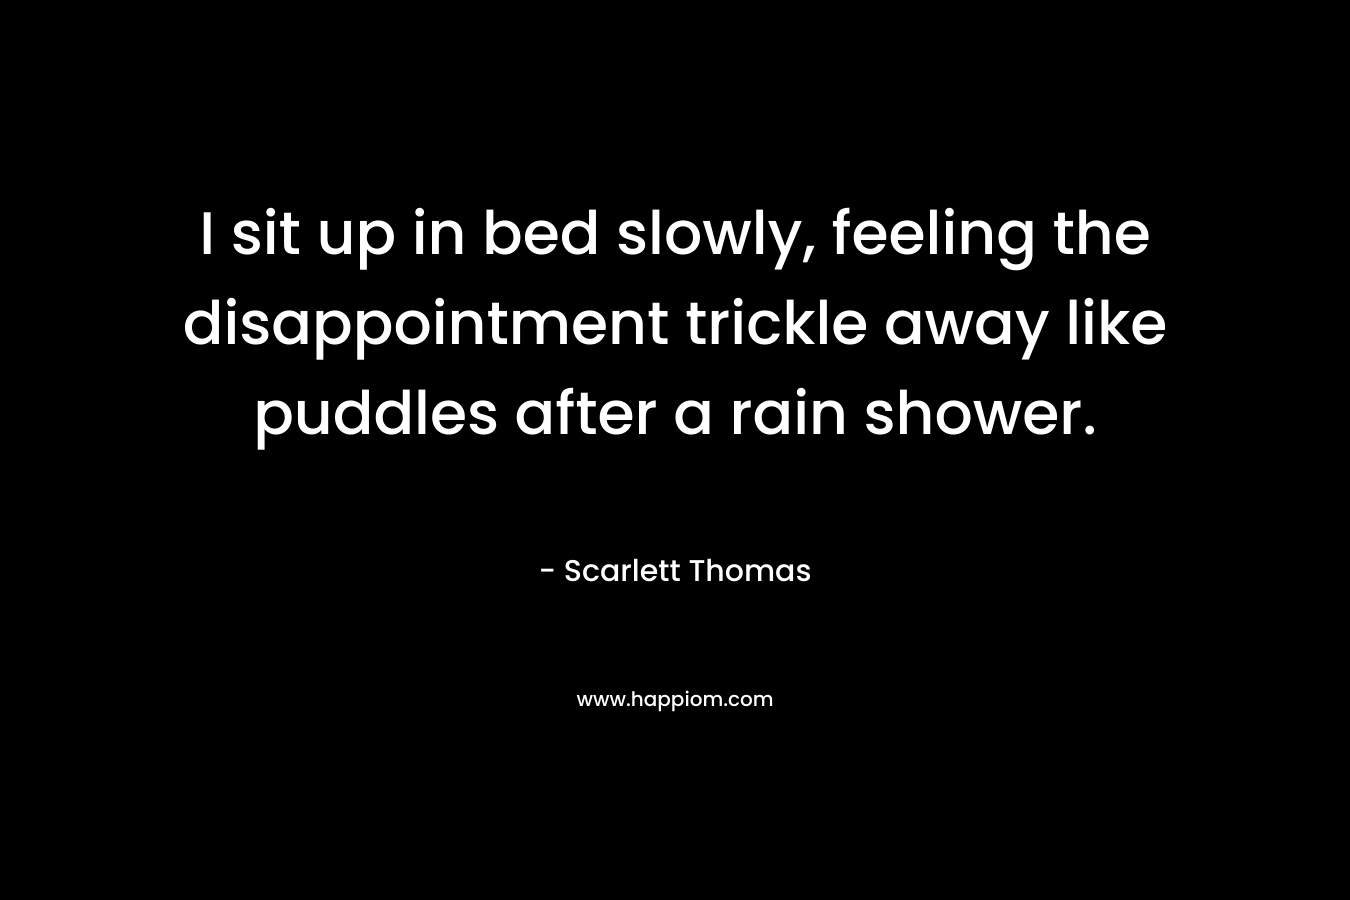 I sit up in bed slowly, feeling the disappointment trickle away like puddles after a rain shower. – Scarlett Thomas